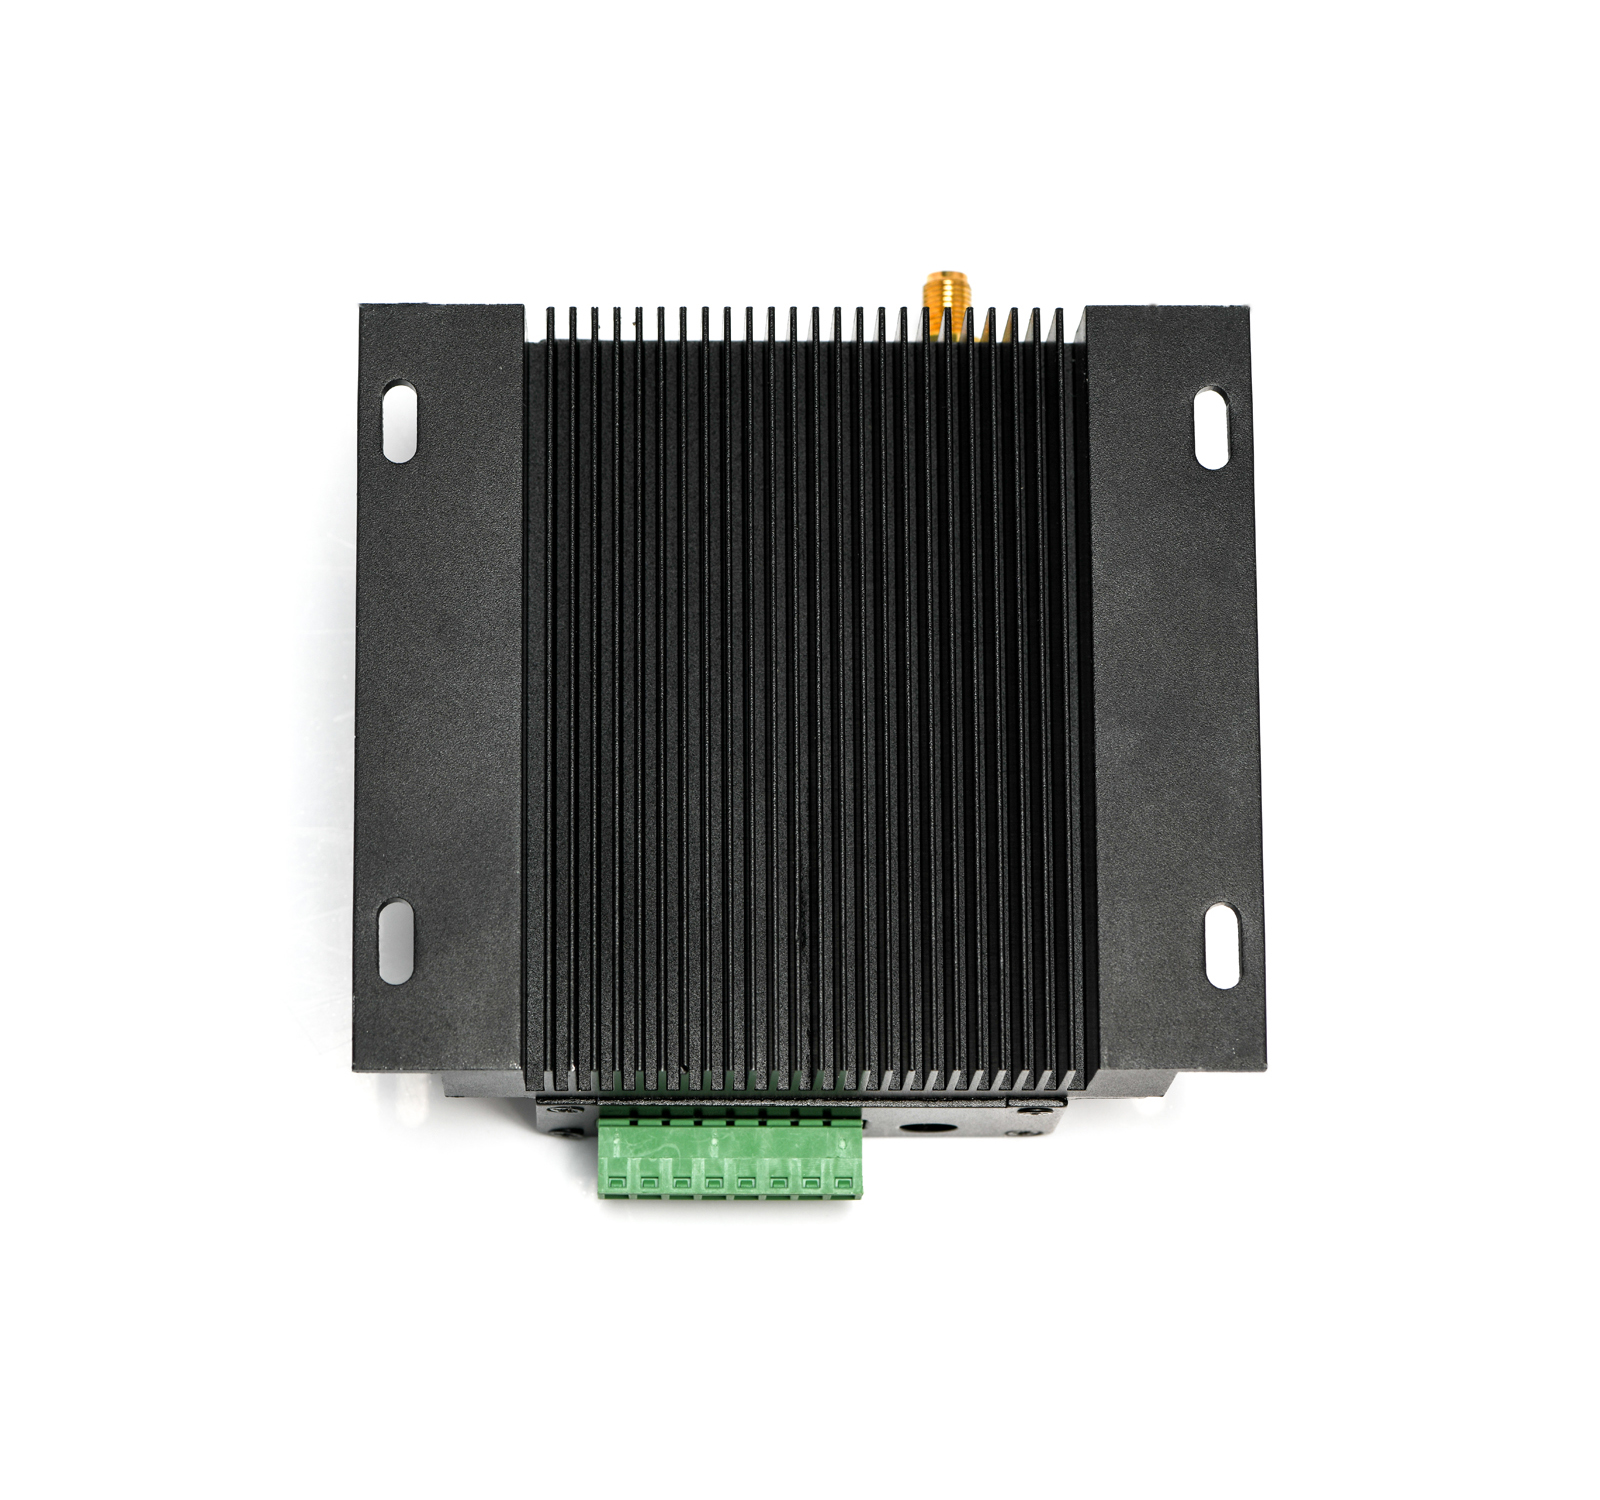 LoRa6500Pro : 5W Wide Voltage & Long Range LoRa RF Modem With Mesh Capability And ESD Protection